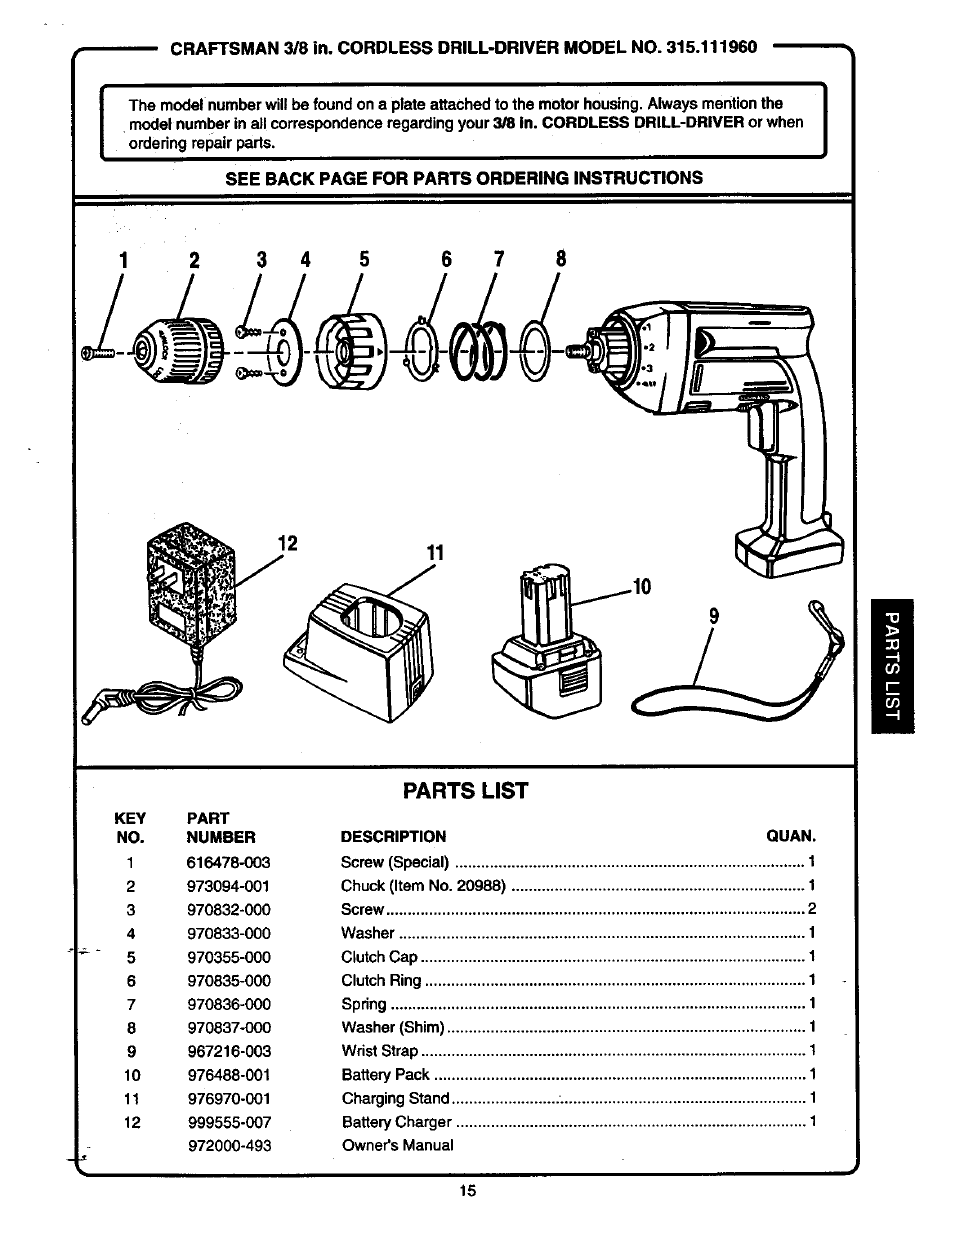 Parts list | Craftsman 315.11196 User Manual | Page 15 / 16